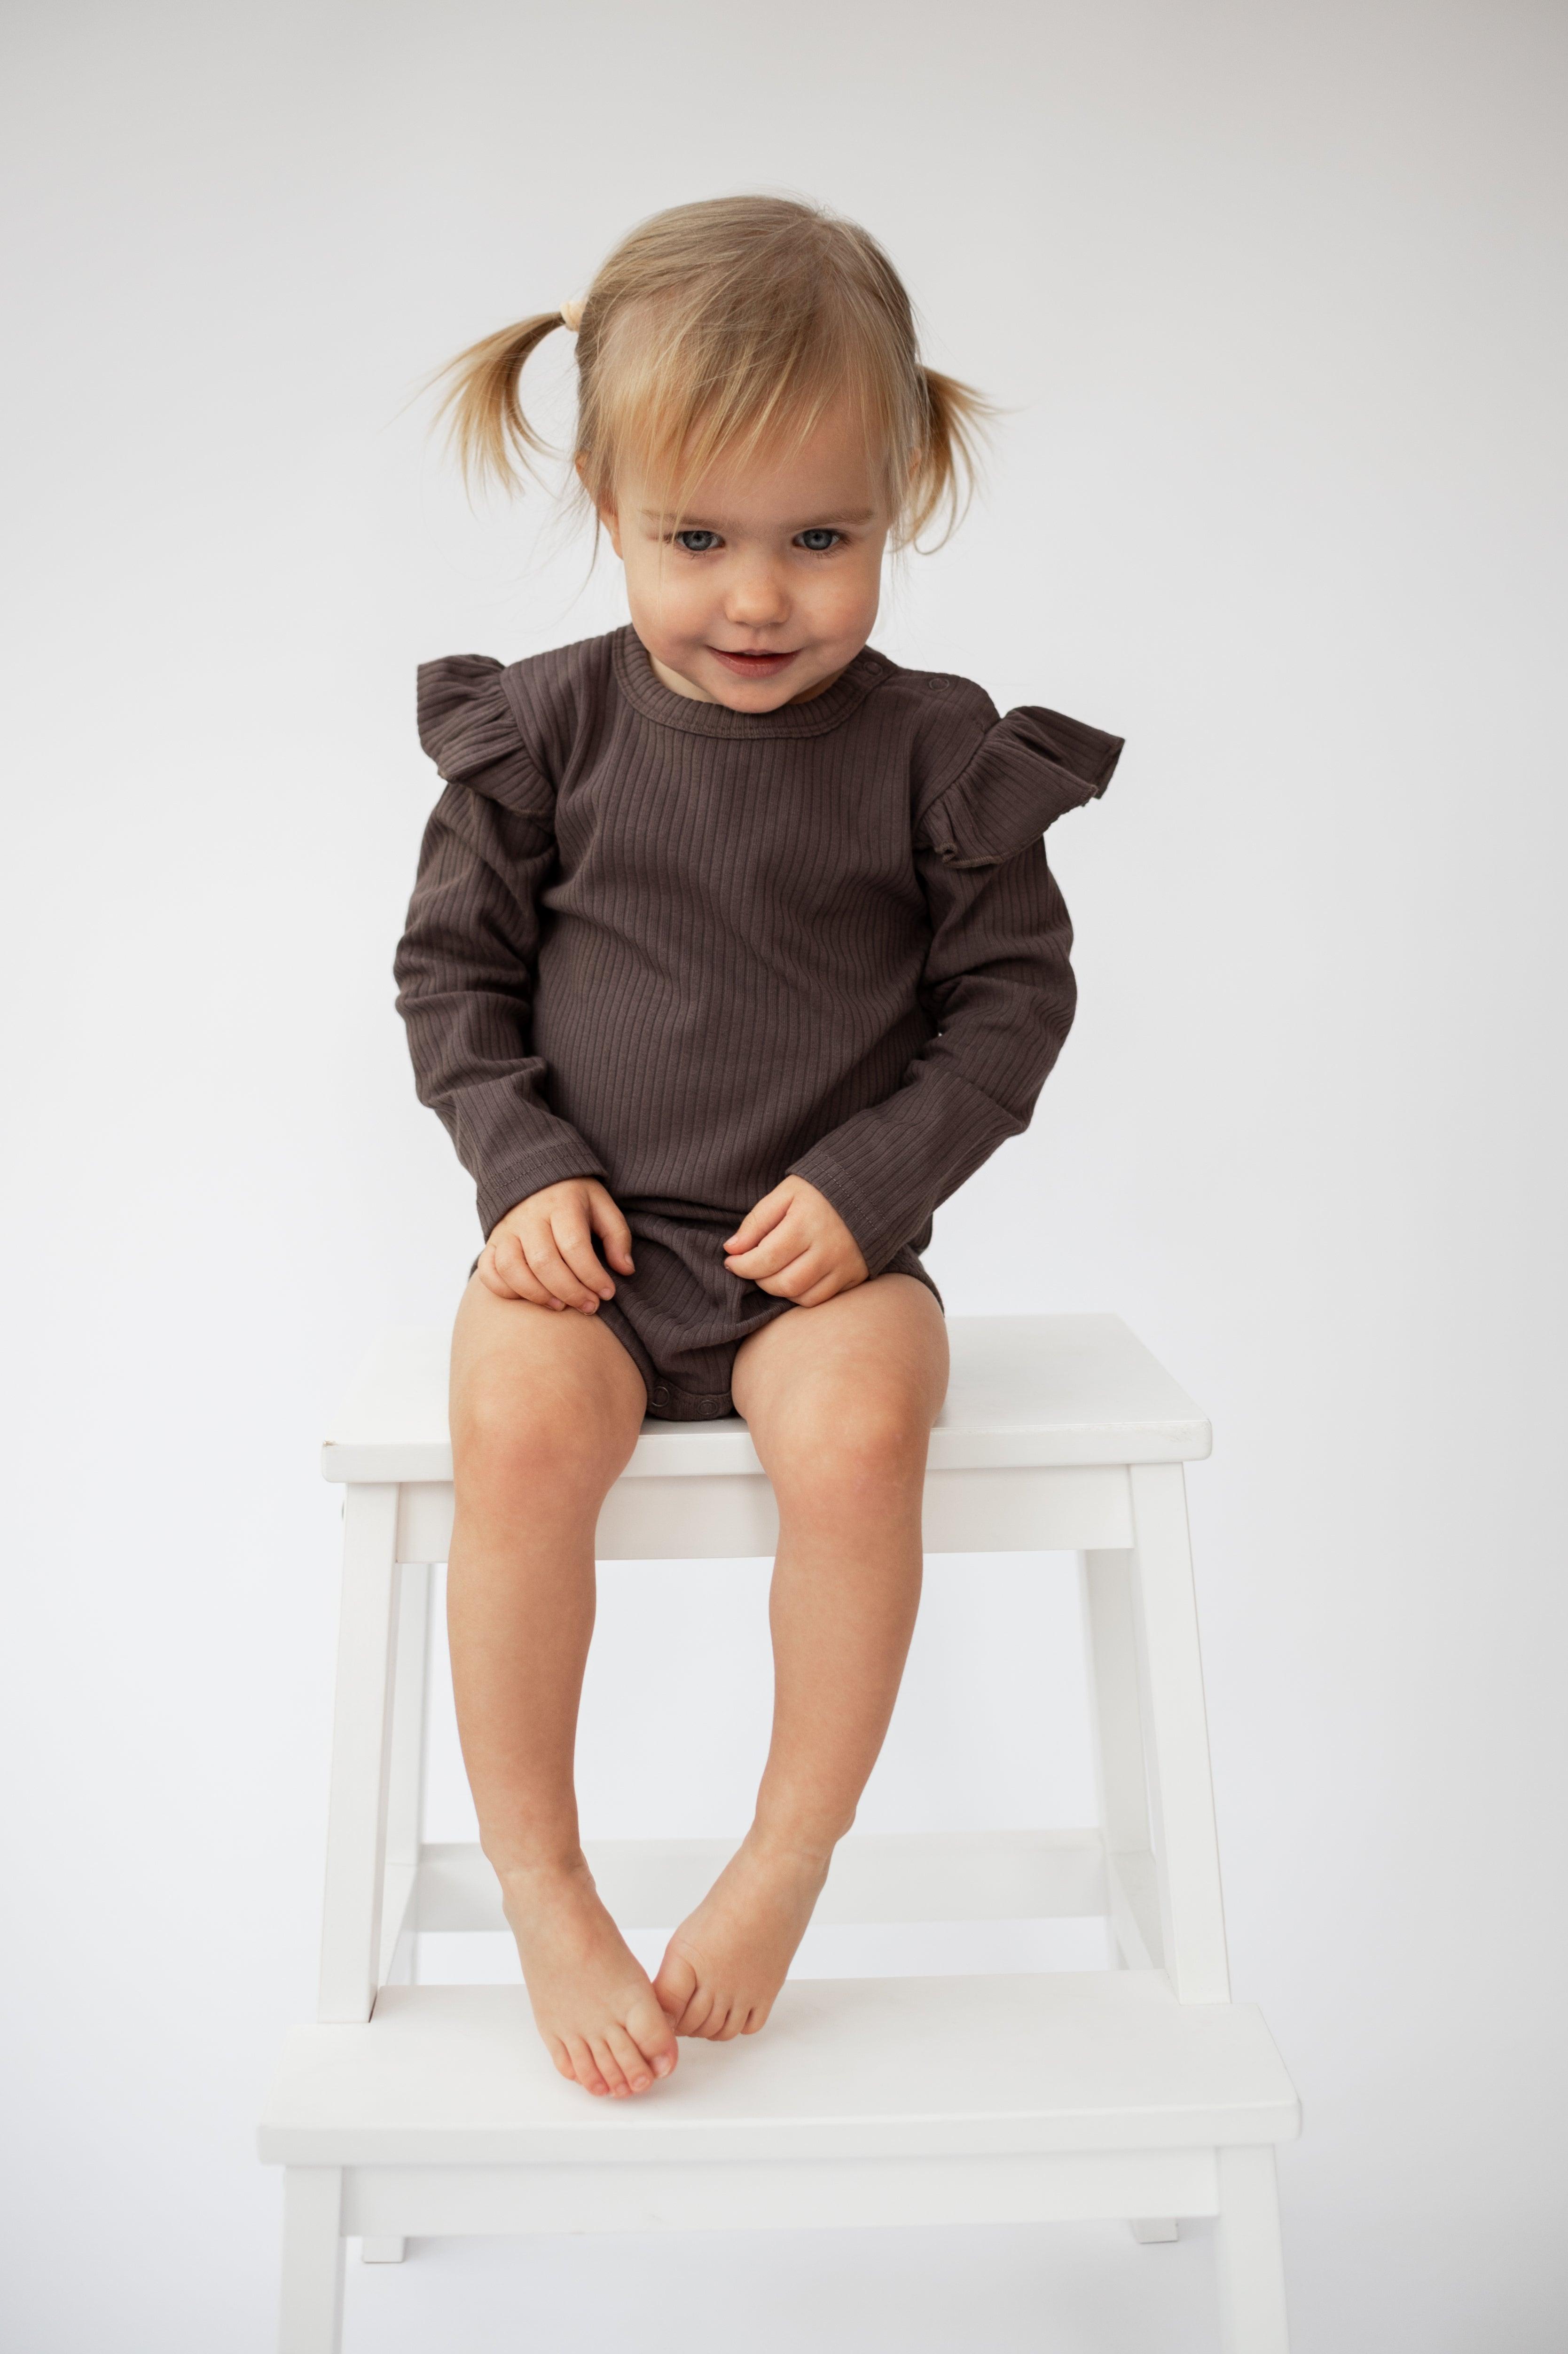 files/charcoal-greybrown-frill-long-sleeve-bodysuit-claybearofficial-2.jpg